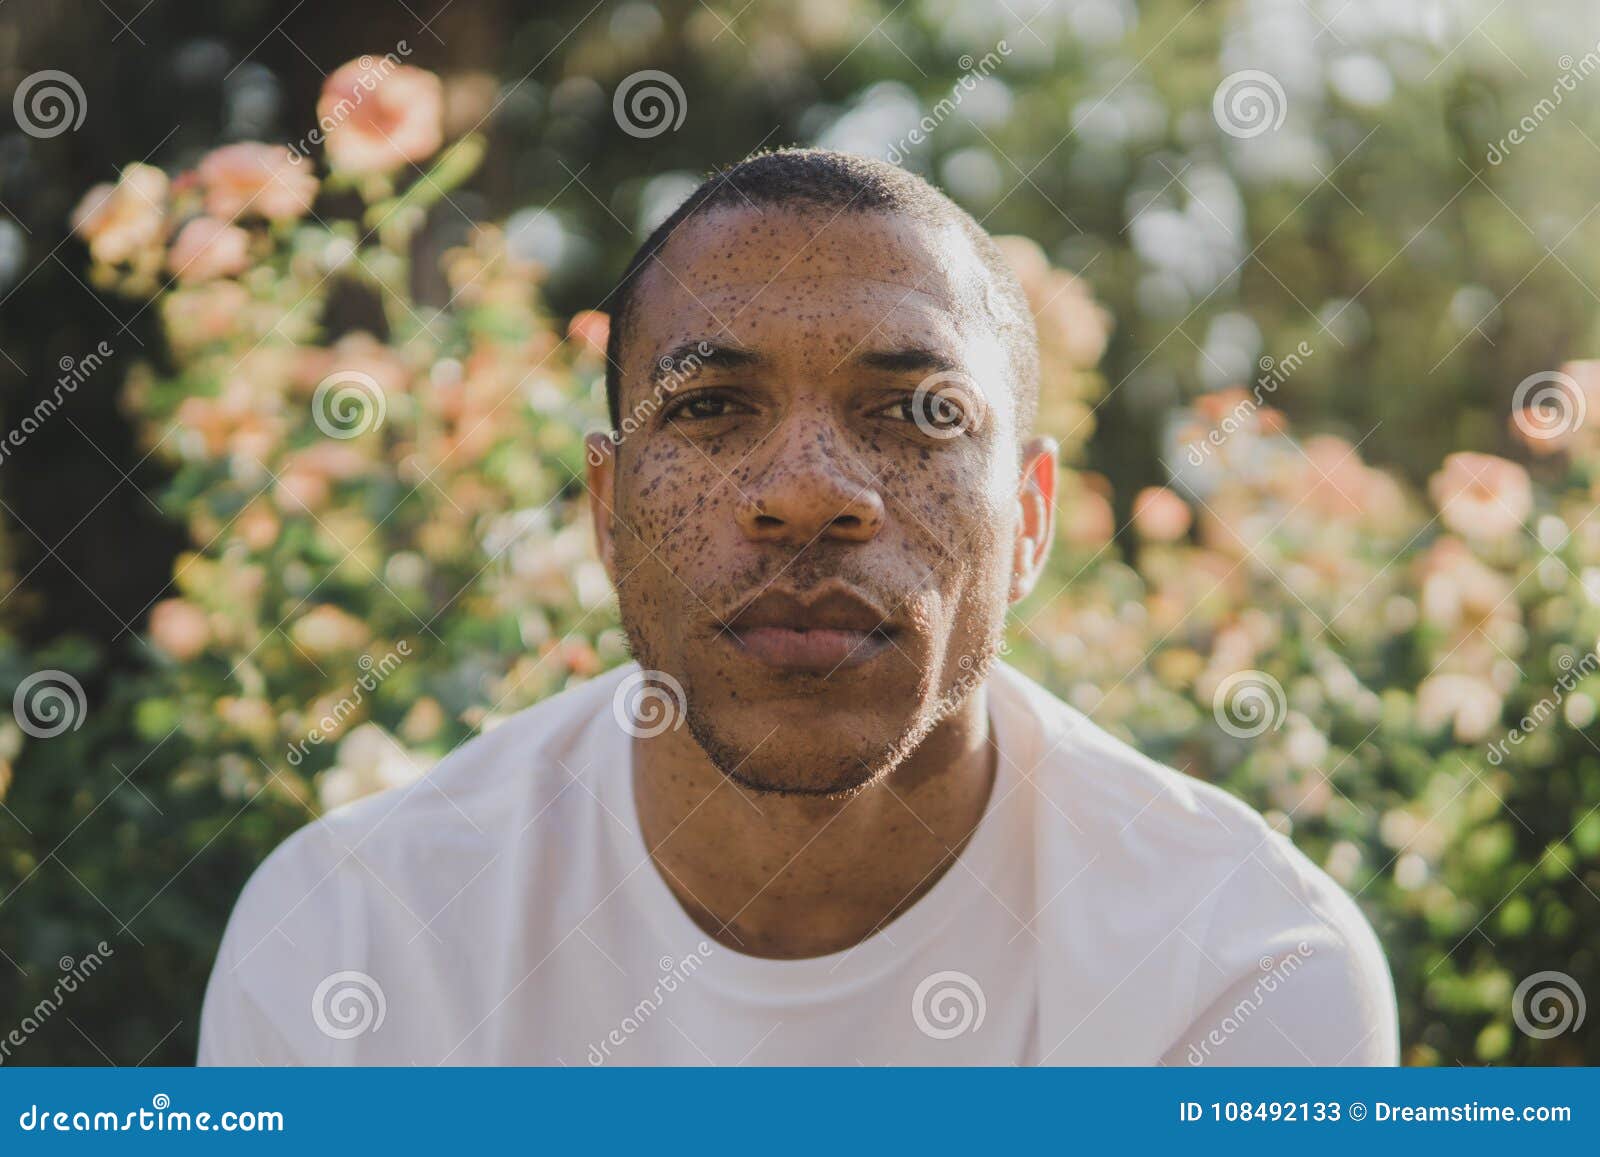 african american man with freckles outdoors looking serious